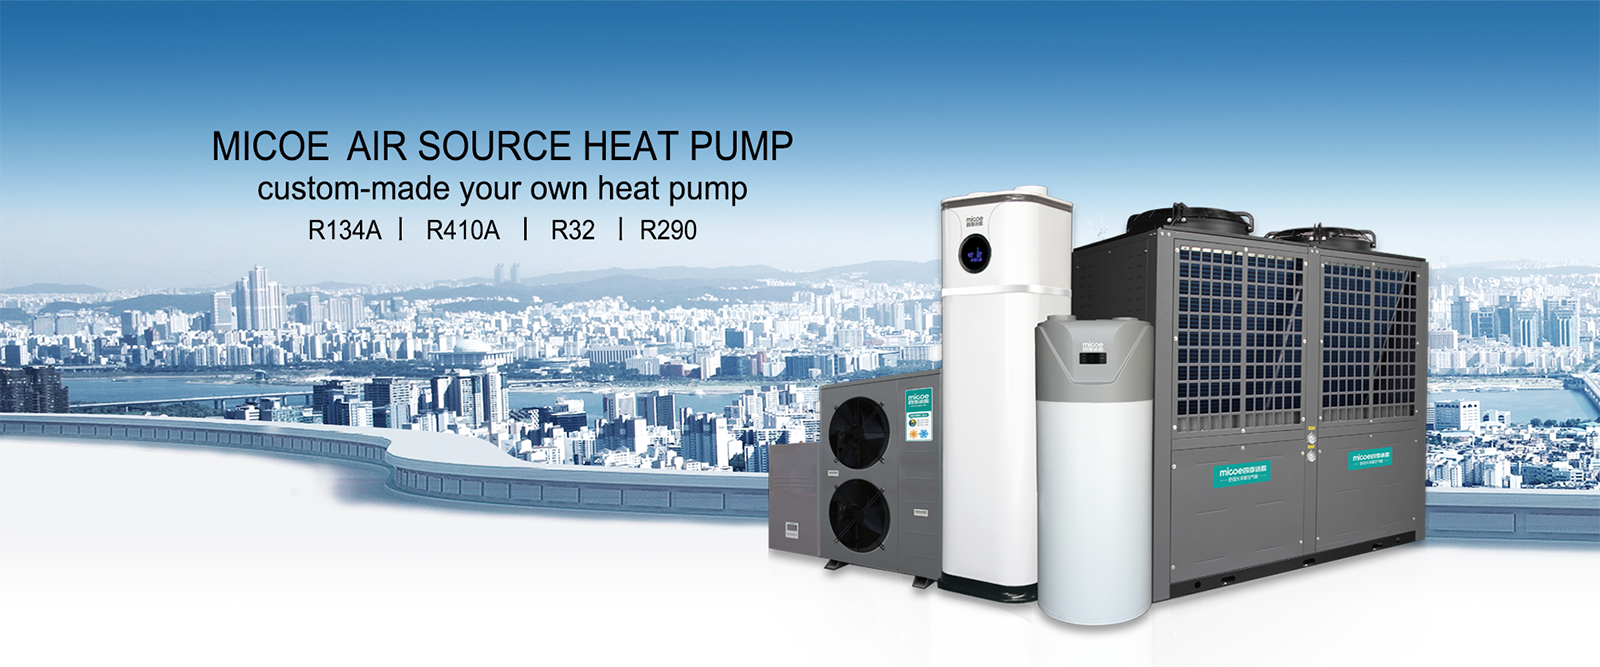 38kw hot water heat pump for sanitary hot water